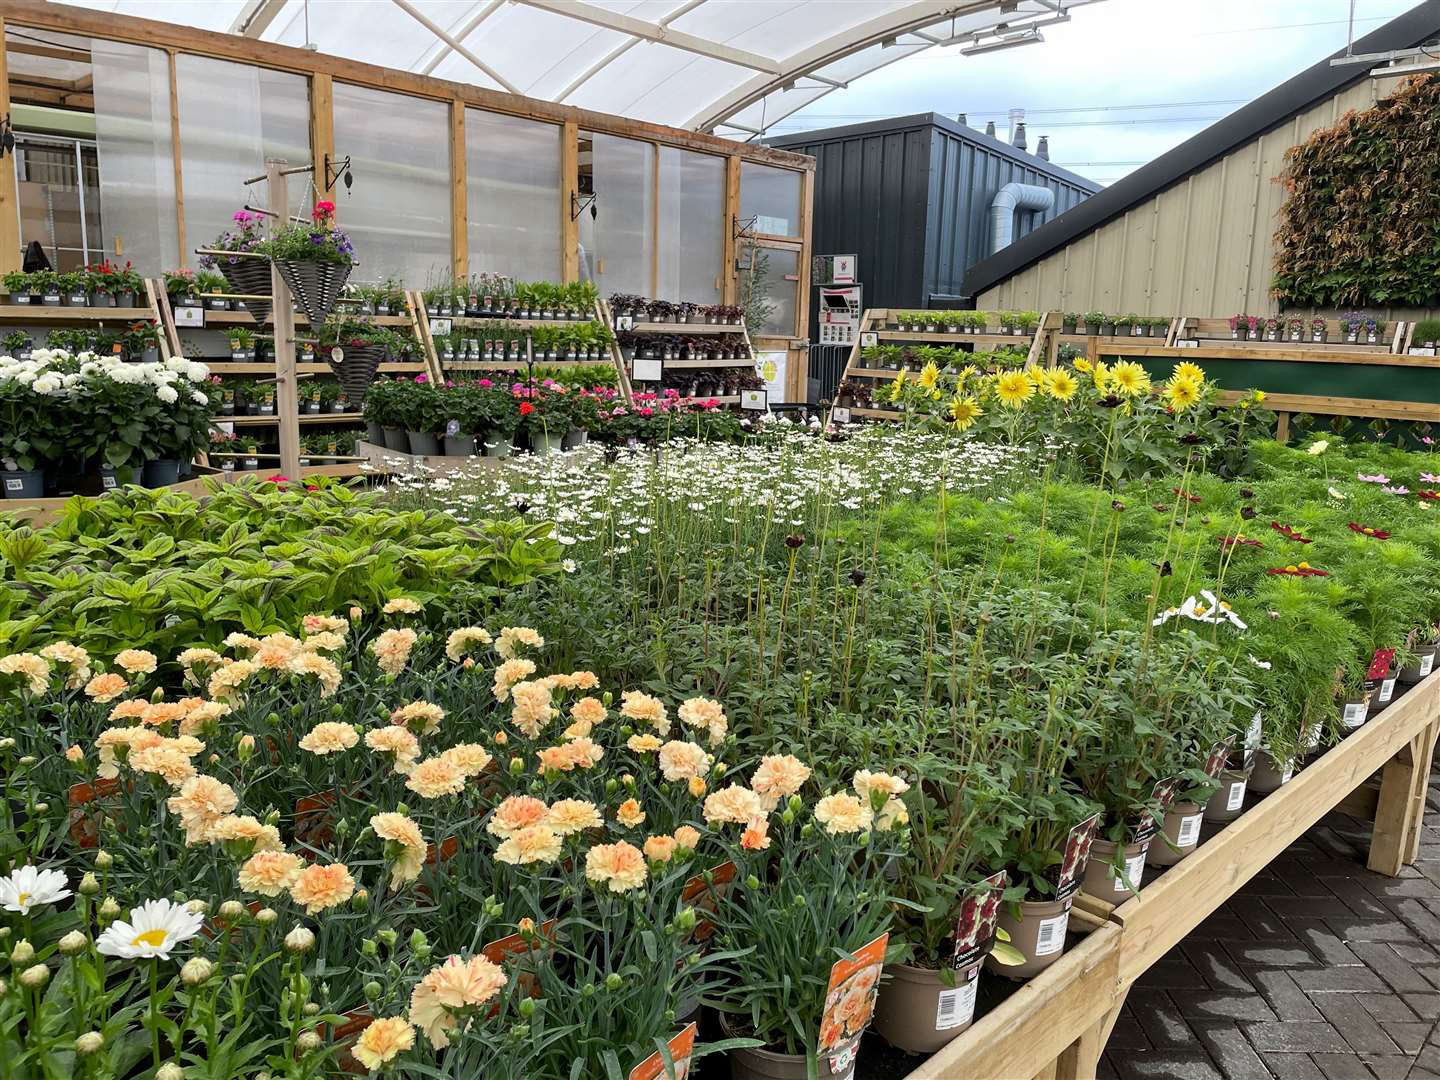 The plants the firm is selling are changing to survive the two weather extremes